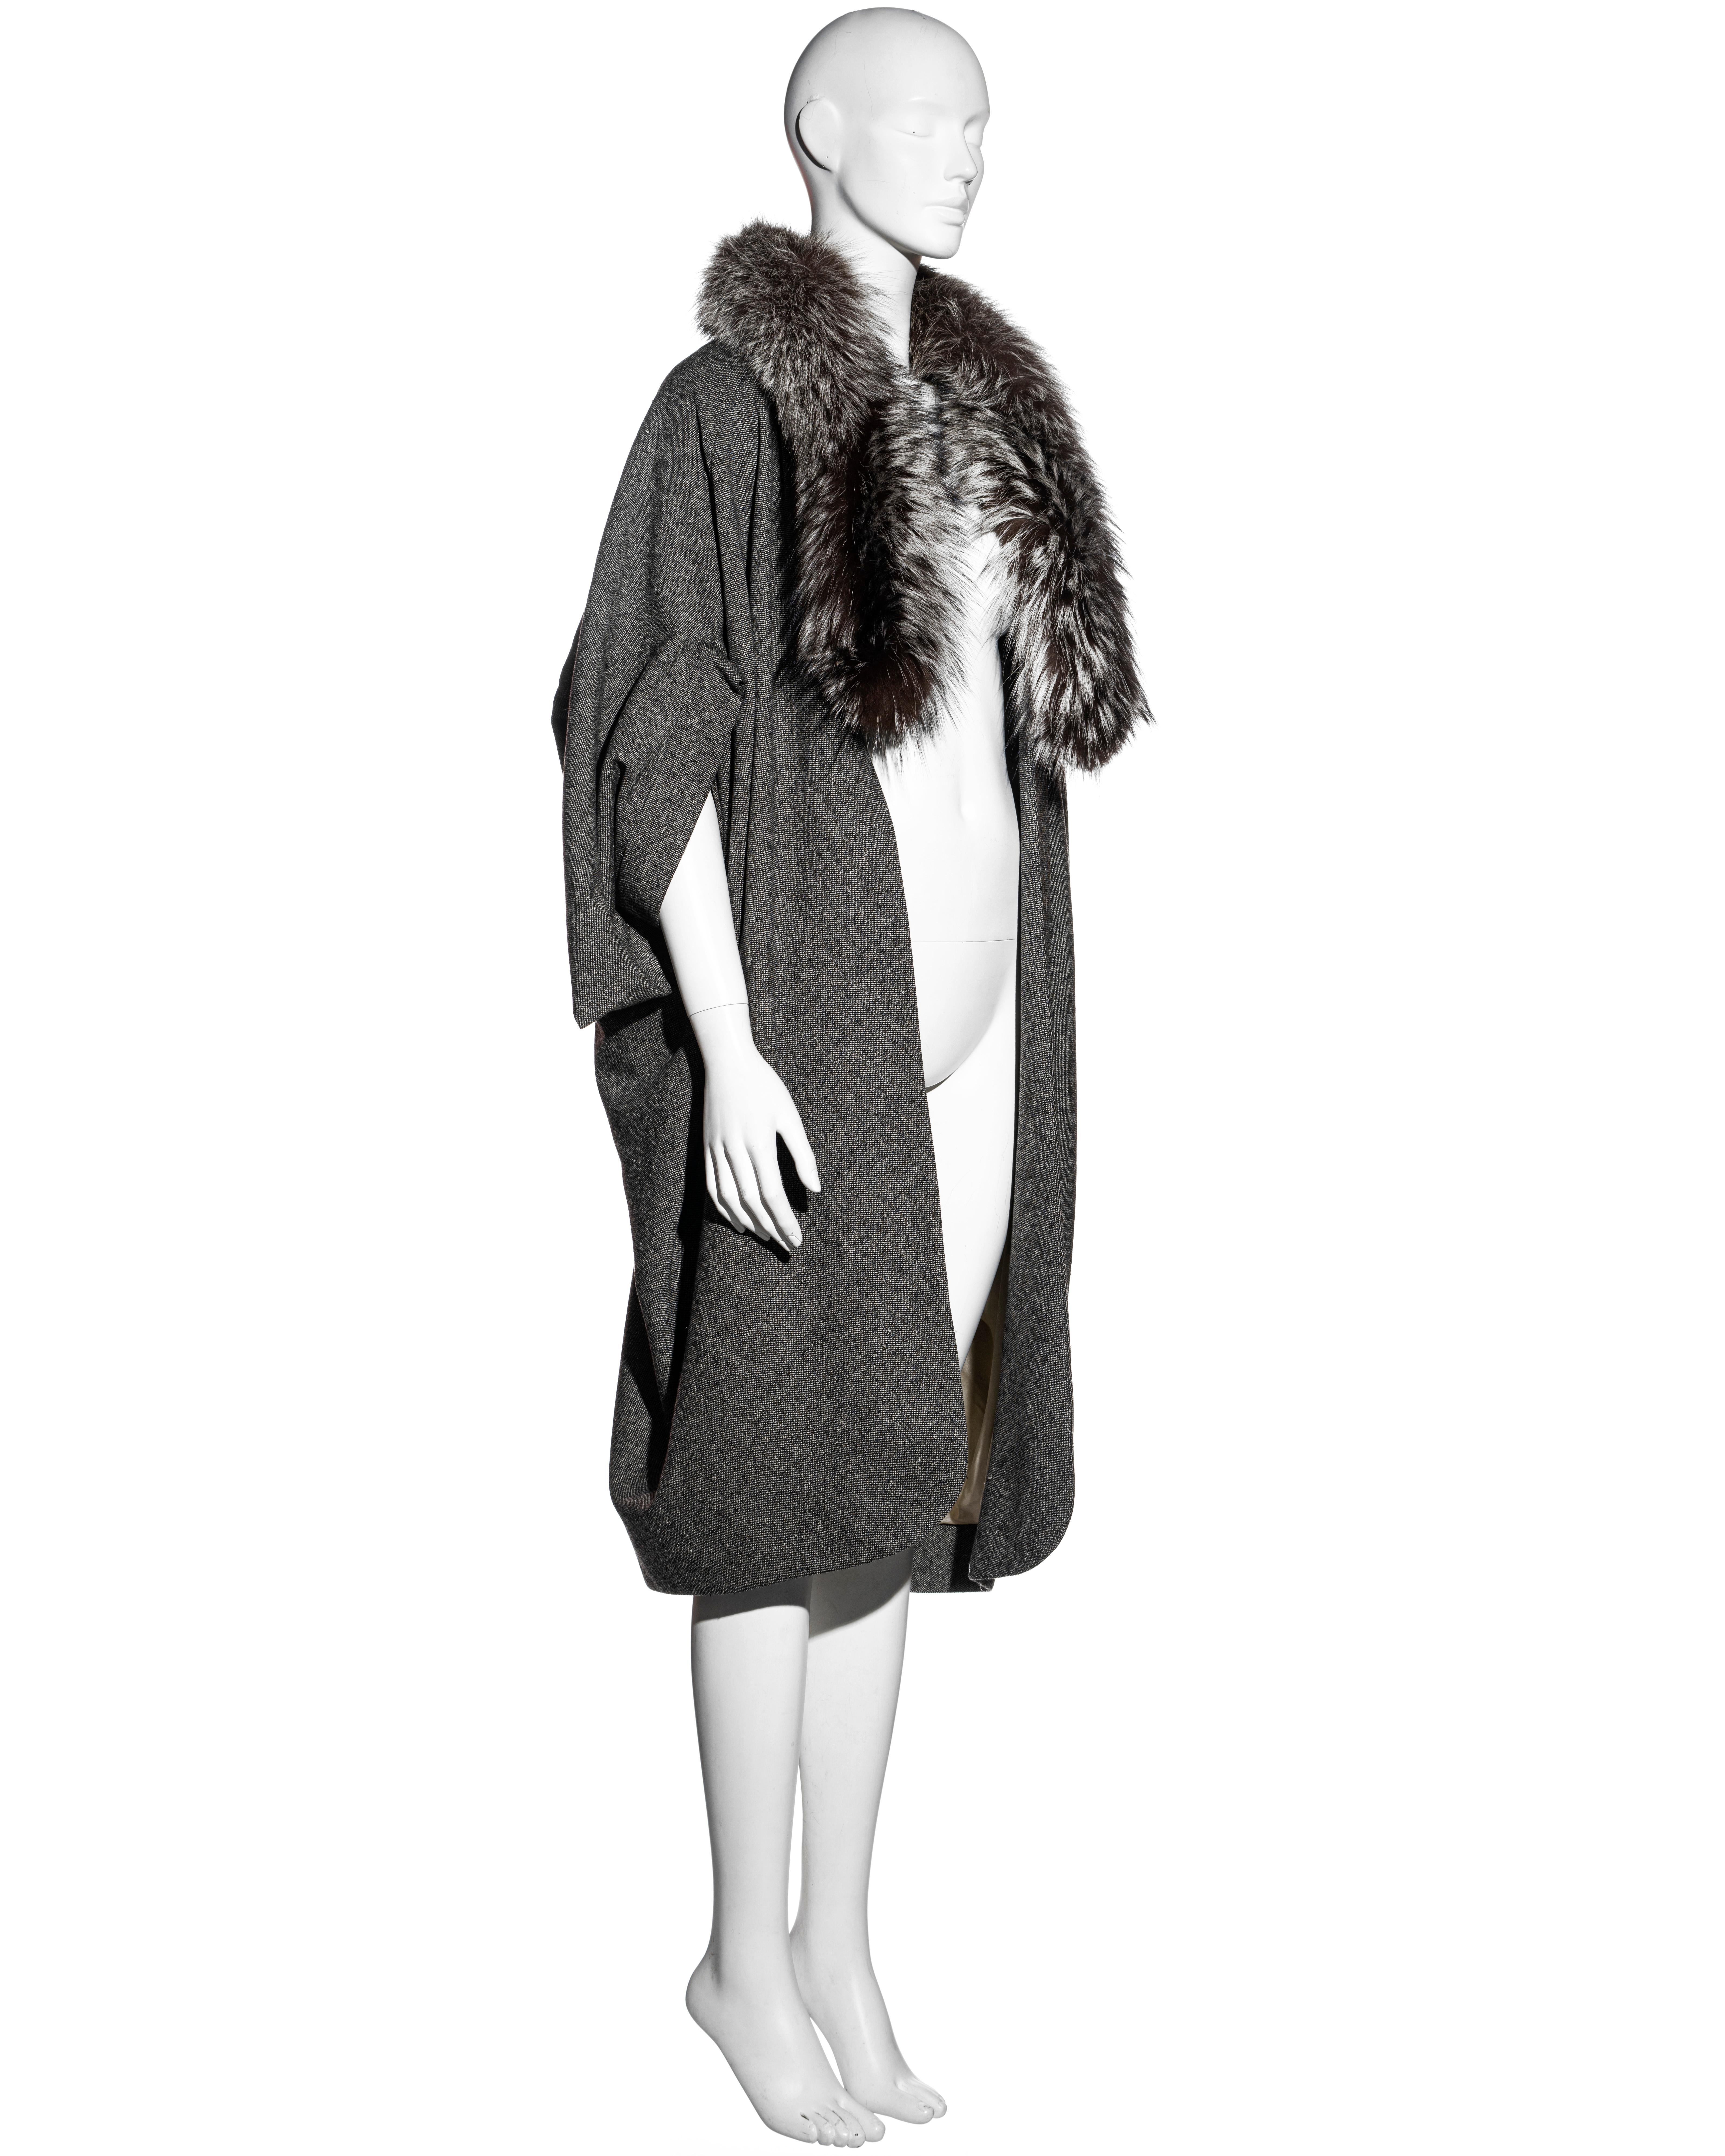 ▪ Christian Dior grey Donegal tweed cocoon coat
▪ Designed by John Galliano 
▪ Fox fur scarf attached to the collar 
▪ Cropped draped sleeves
▪ Open front
▪ Ivory silk lining 
▪ 92% Virgin Wool, 6% Cashmere, 2% Elastane 
▪ FR 36 - UK 8